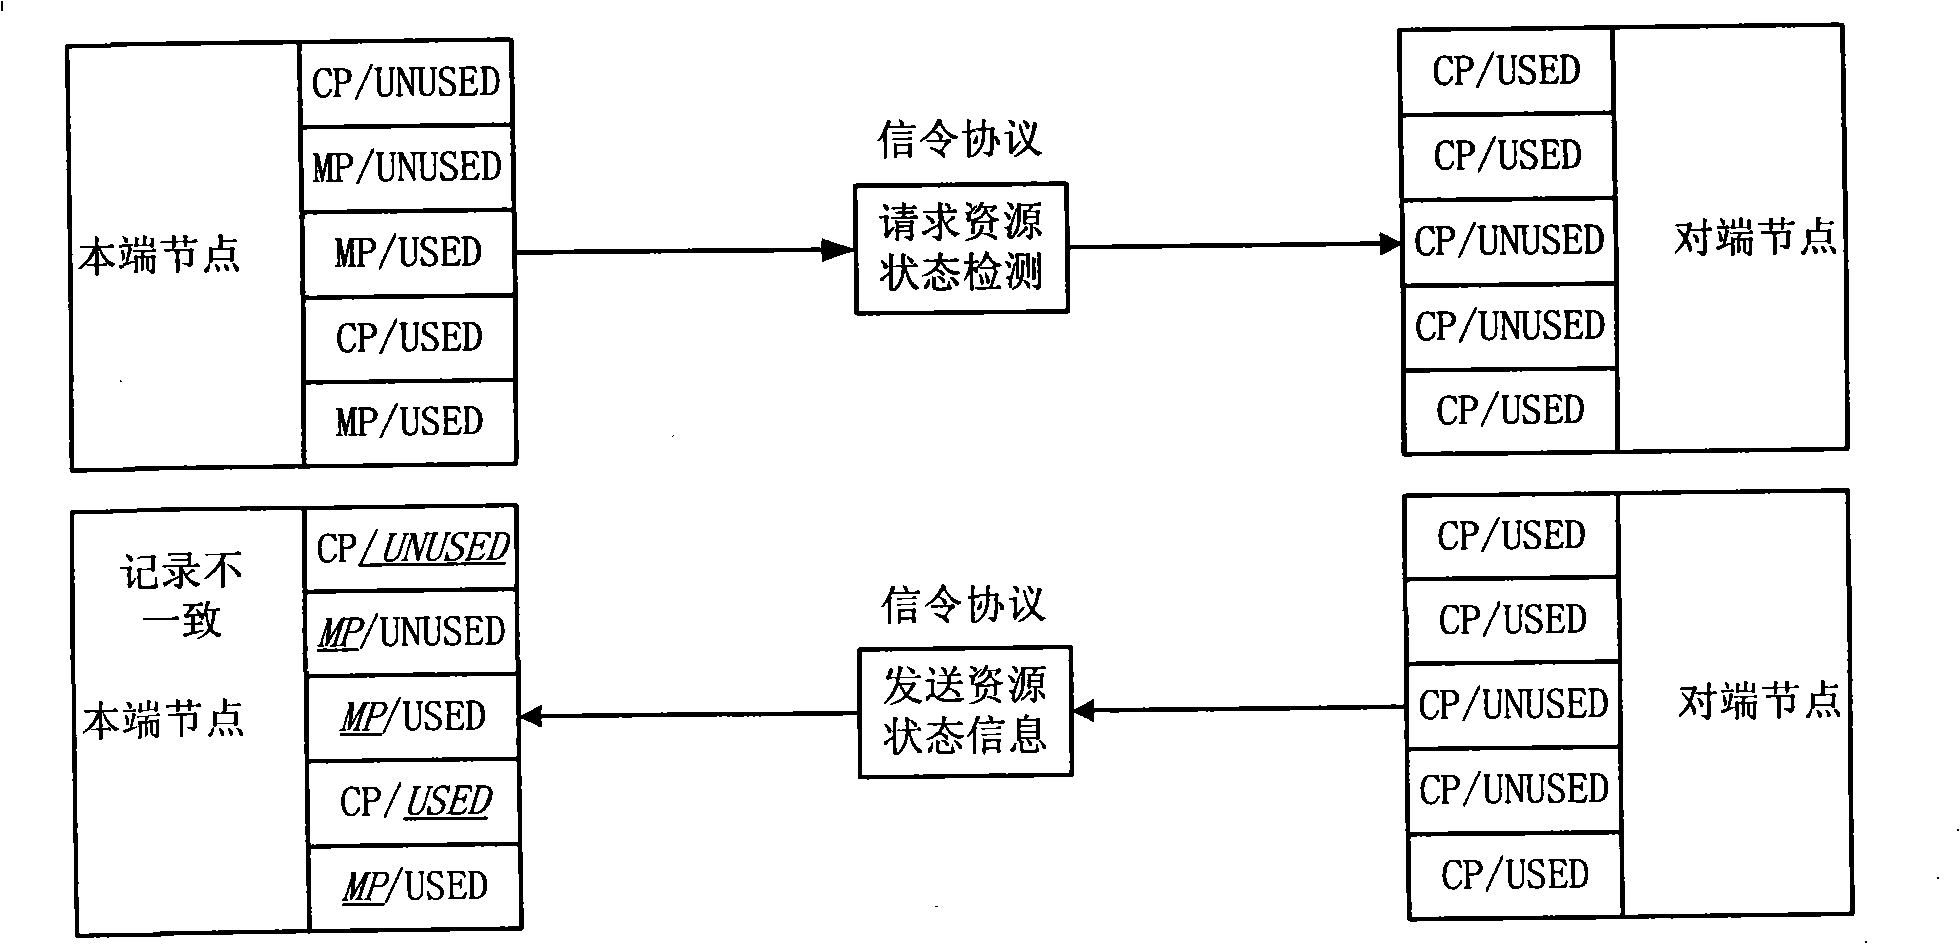 Method and system for managing resource state in automatic exchange optical network